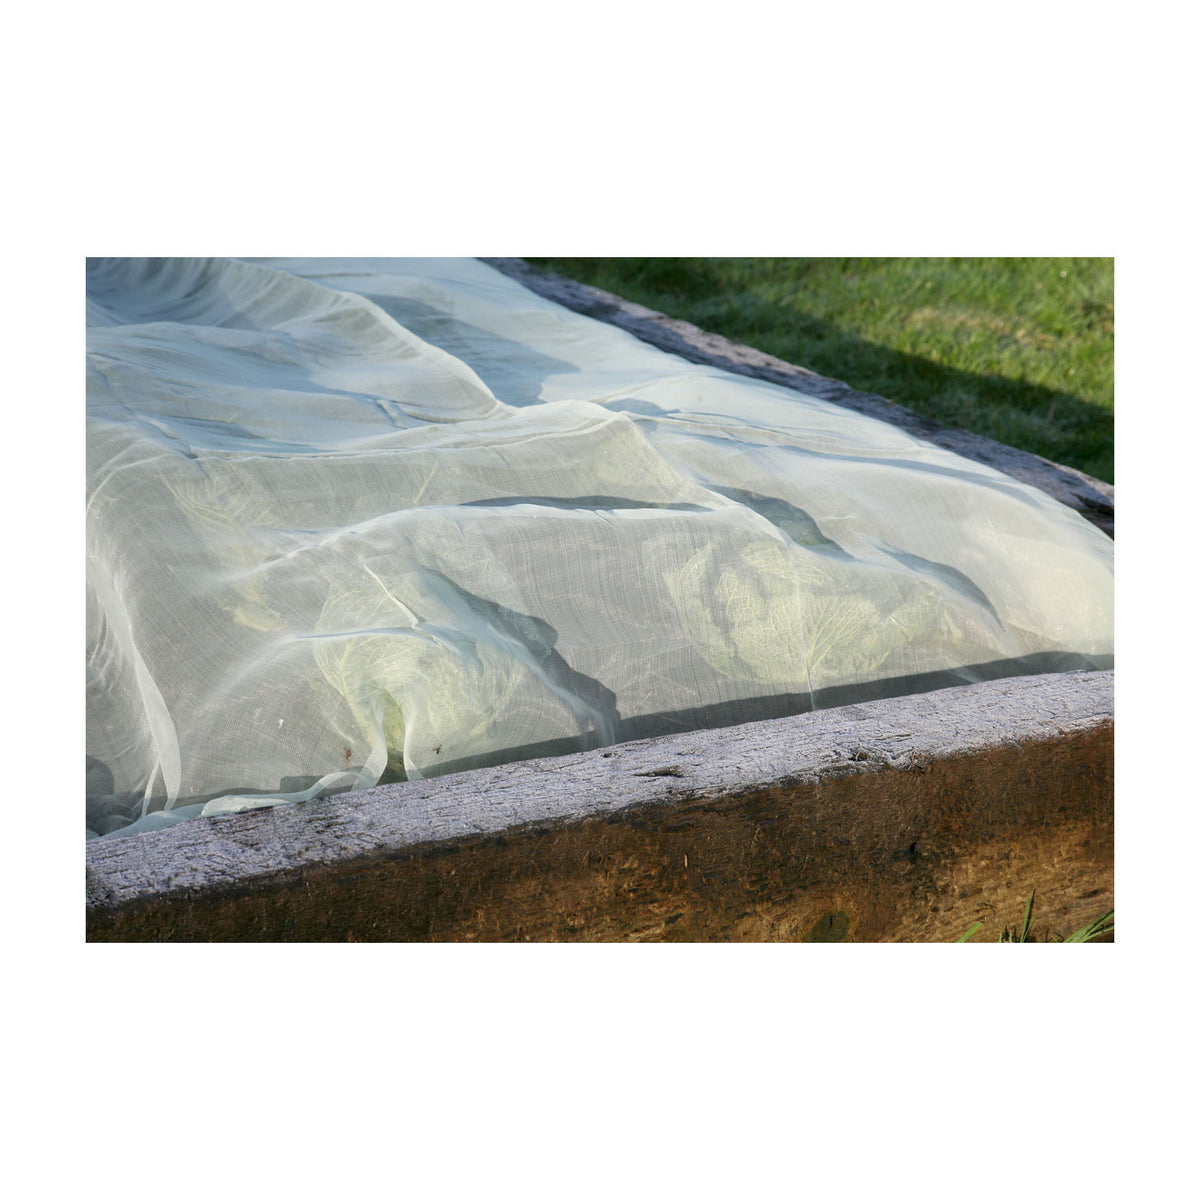 12&#39; x 12&#39; Pre-Cut Micromesh Blanket. Green tint provides shade and retains moisture. 